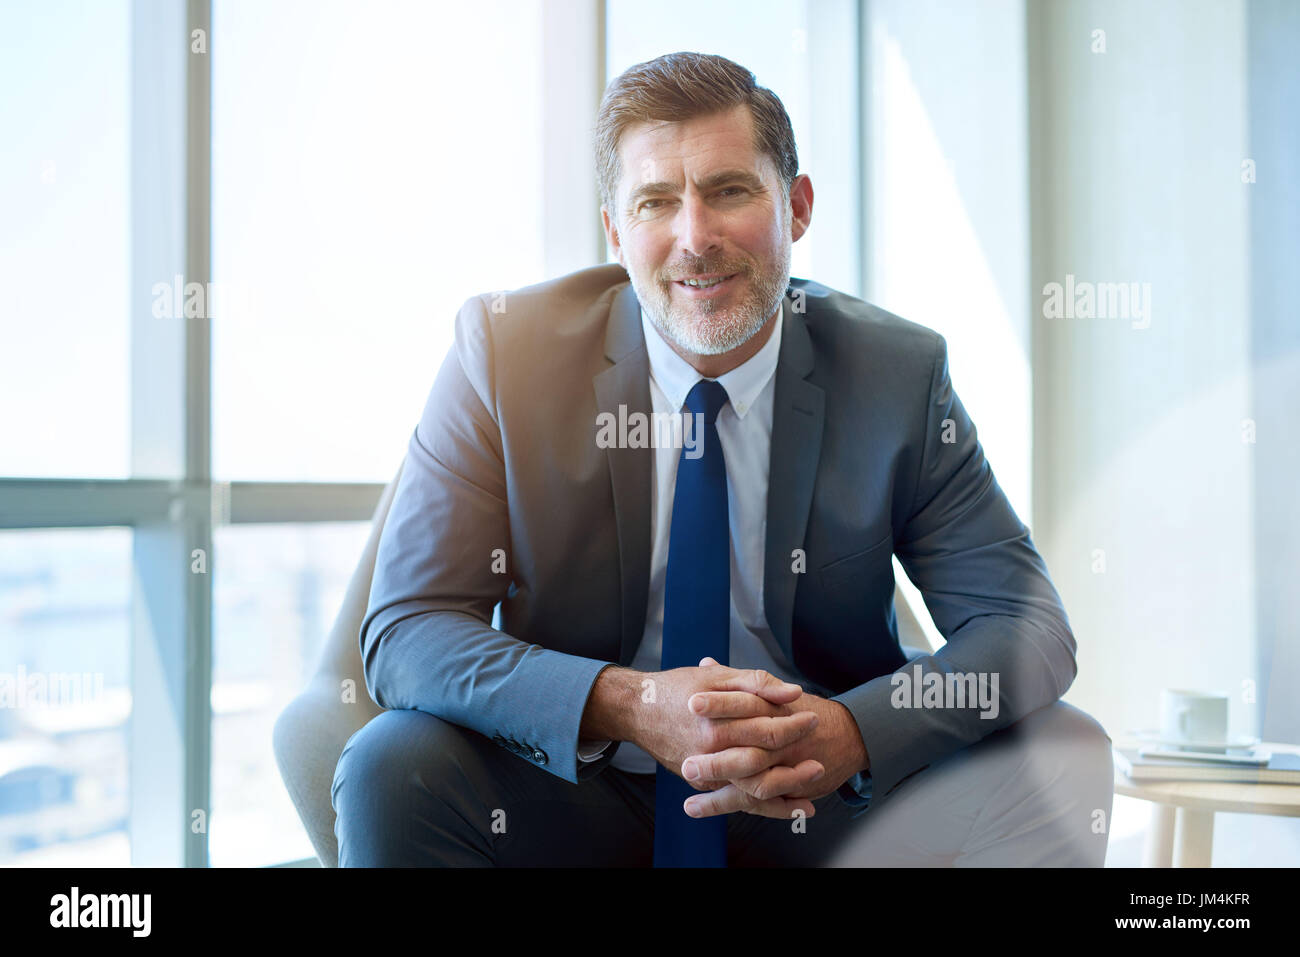 Portrait of a handsome mature business CEO smiling warmly at the camera while sitting in a modern office space with large windows and gentle sunflare Stock Photo